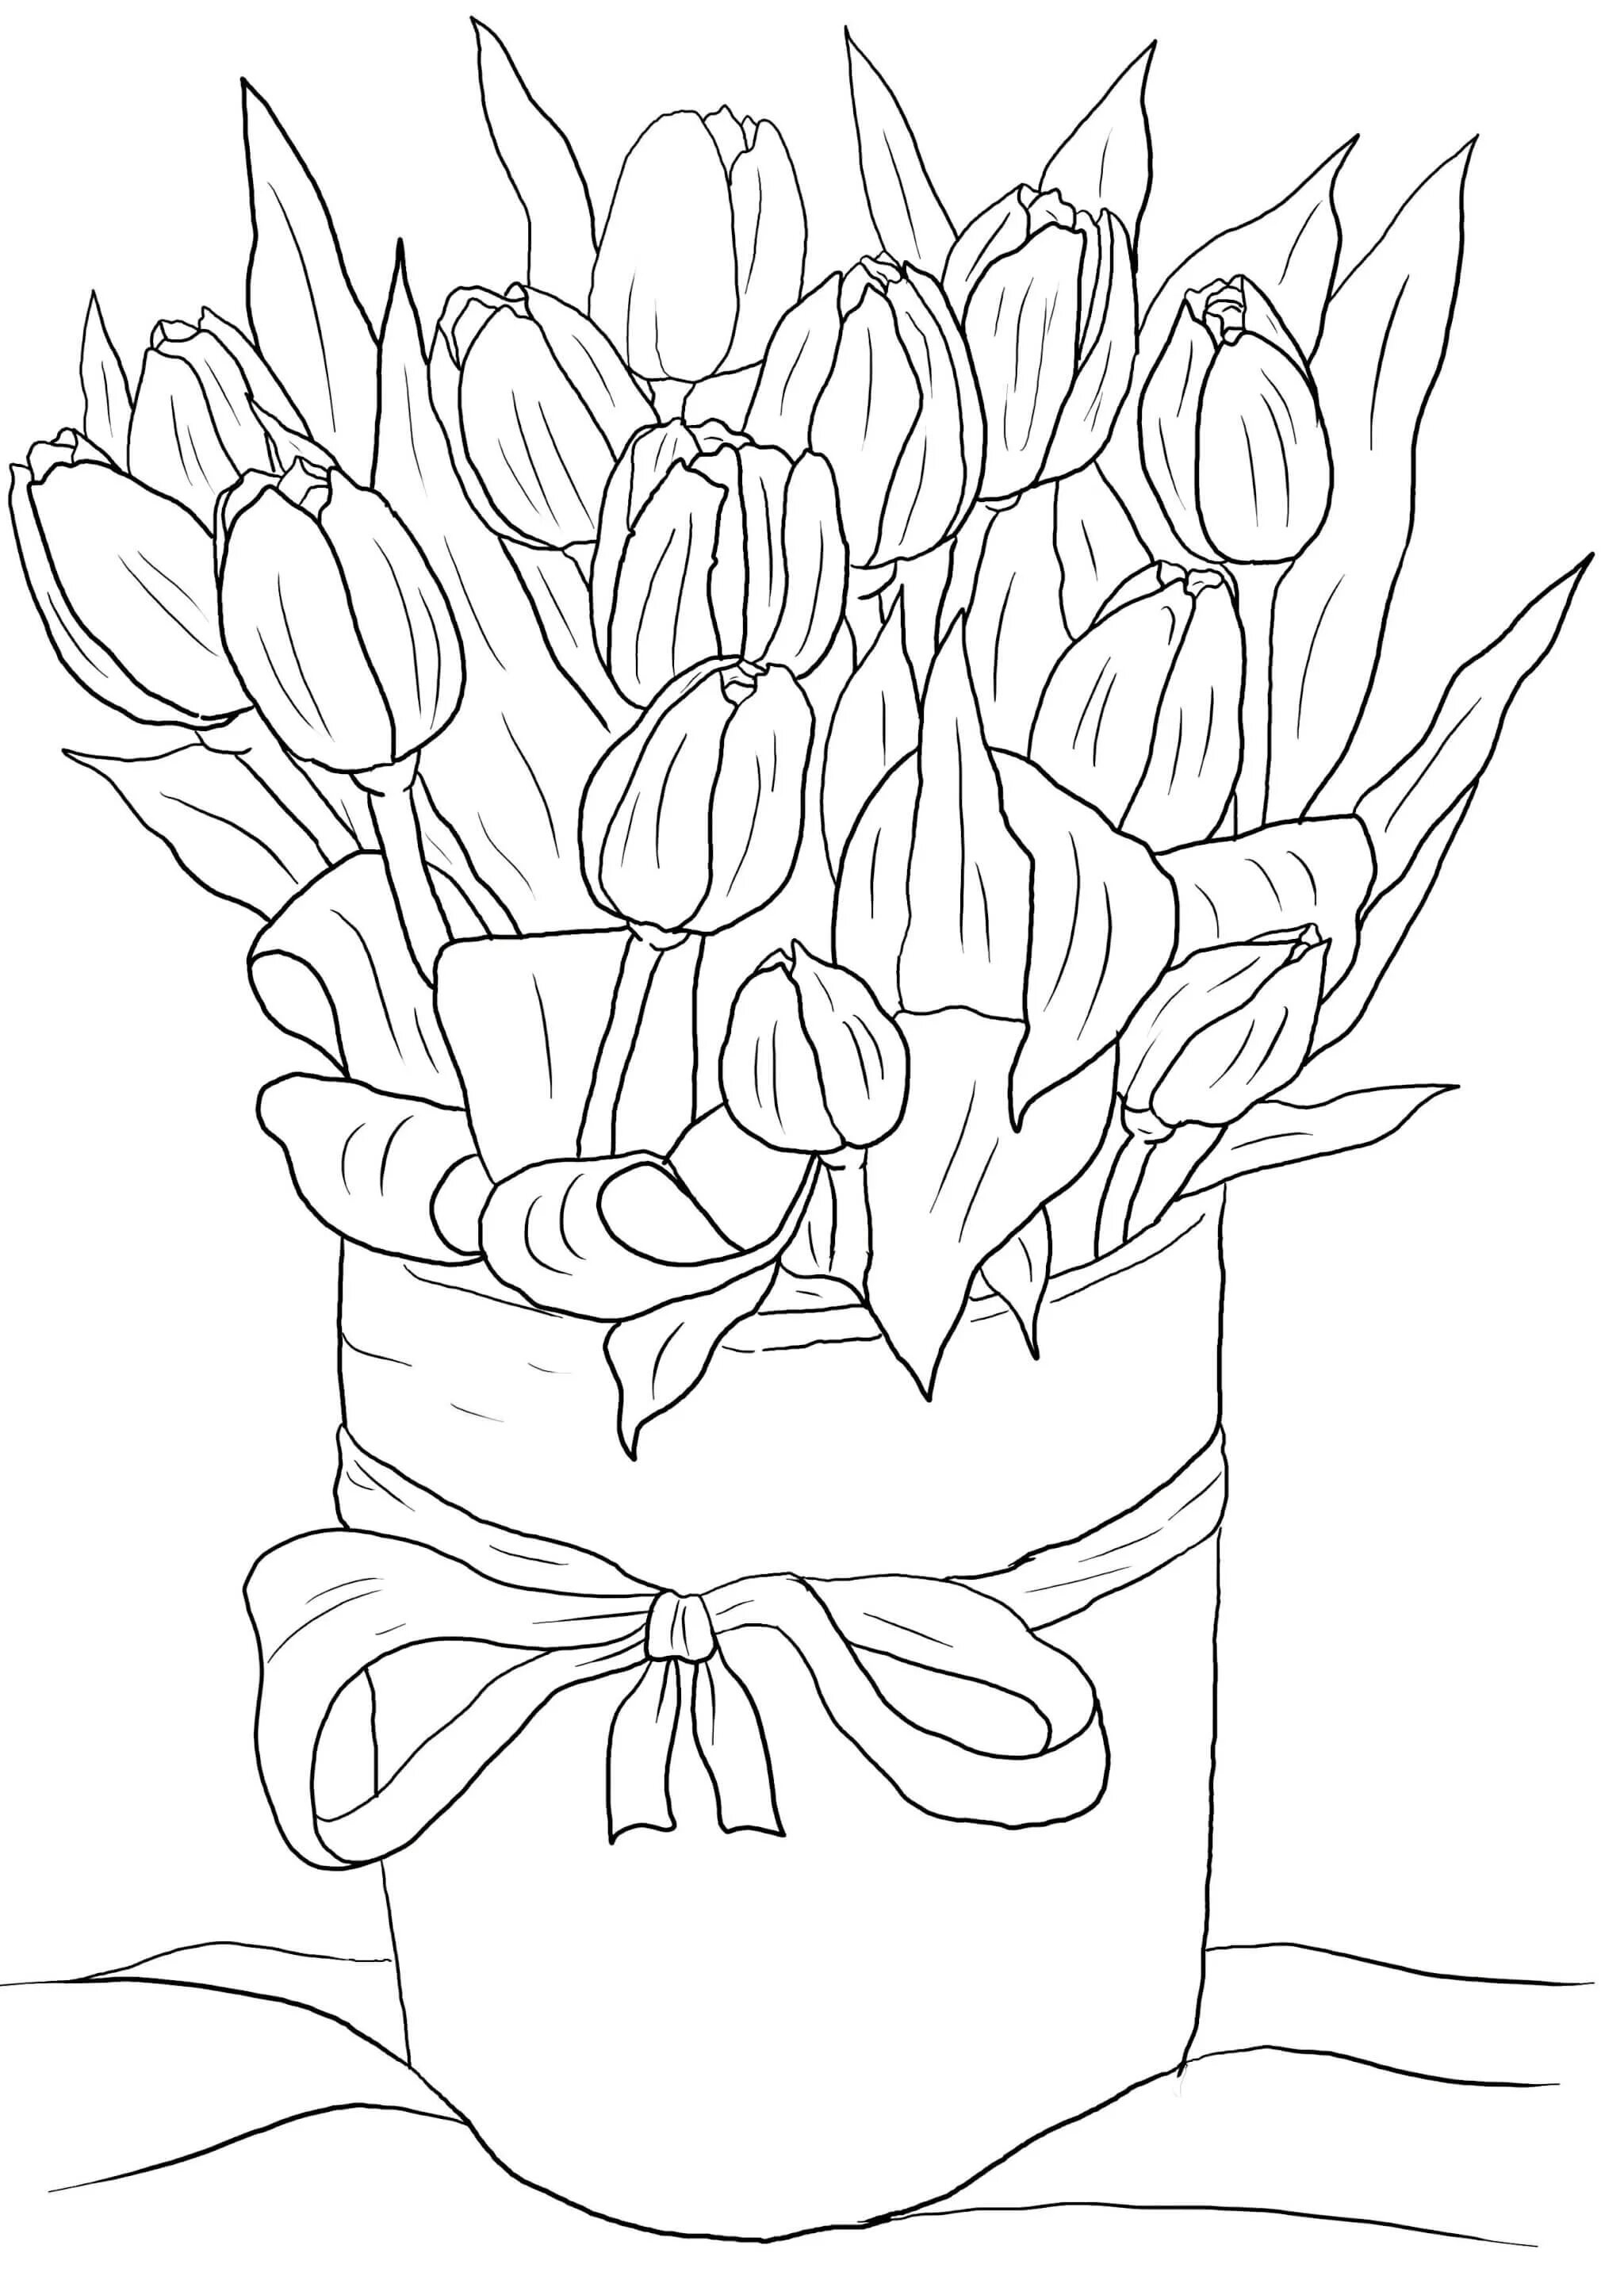 Coloring tulips for March 8